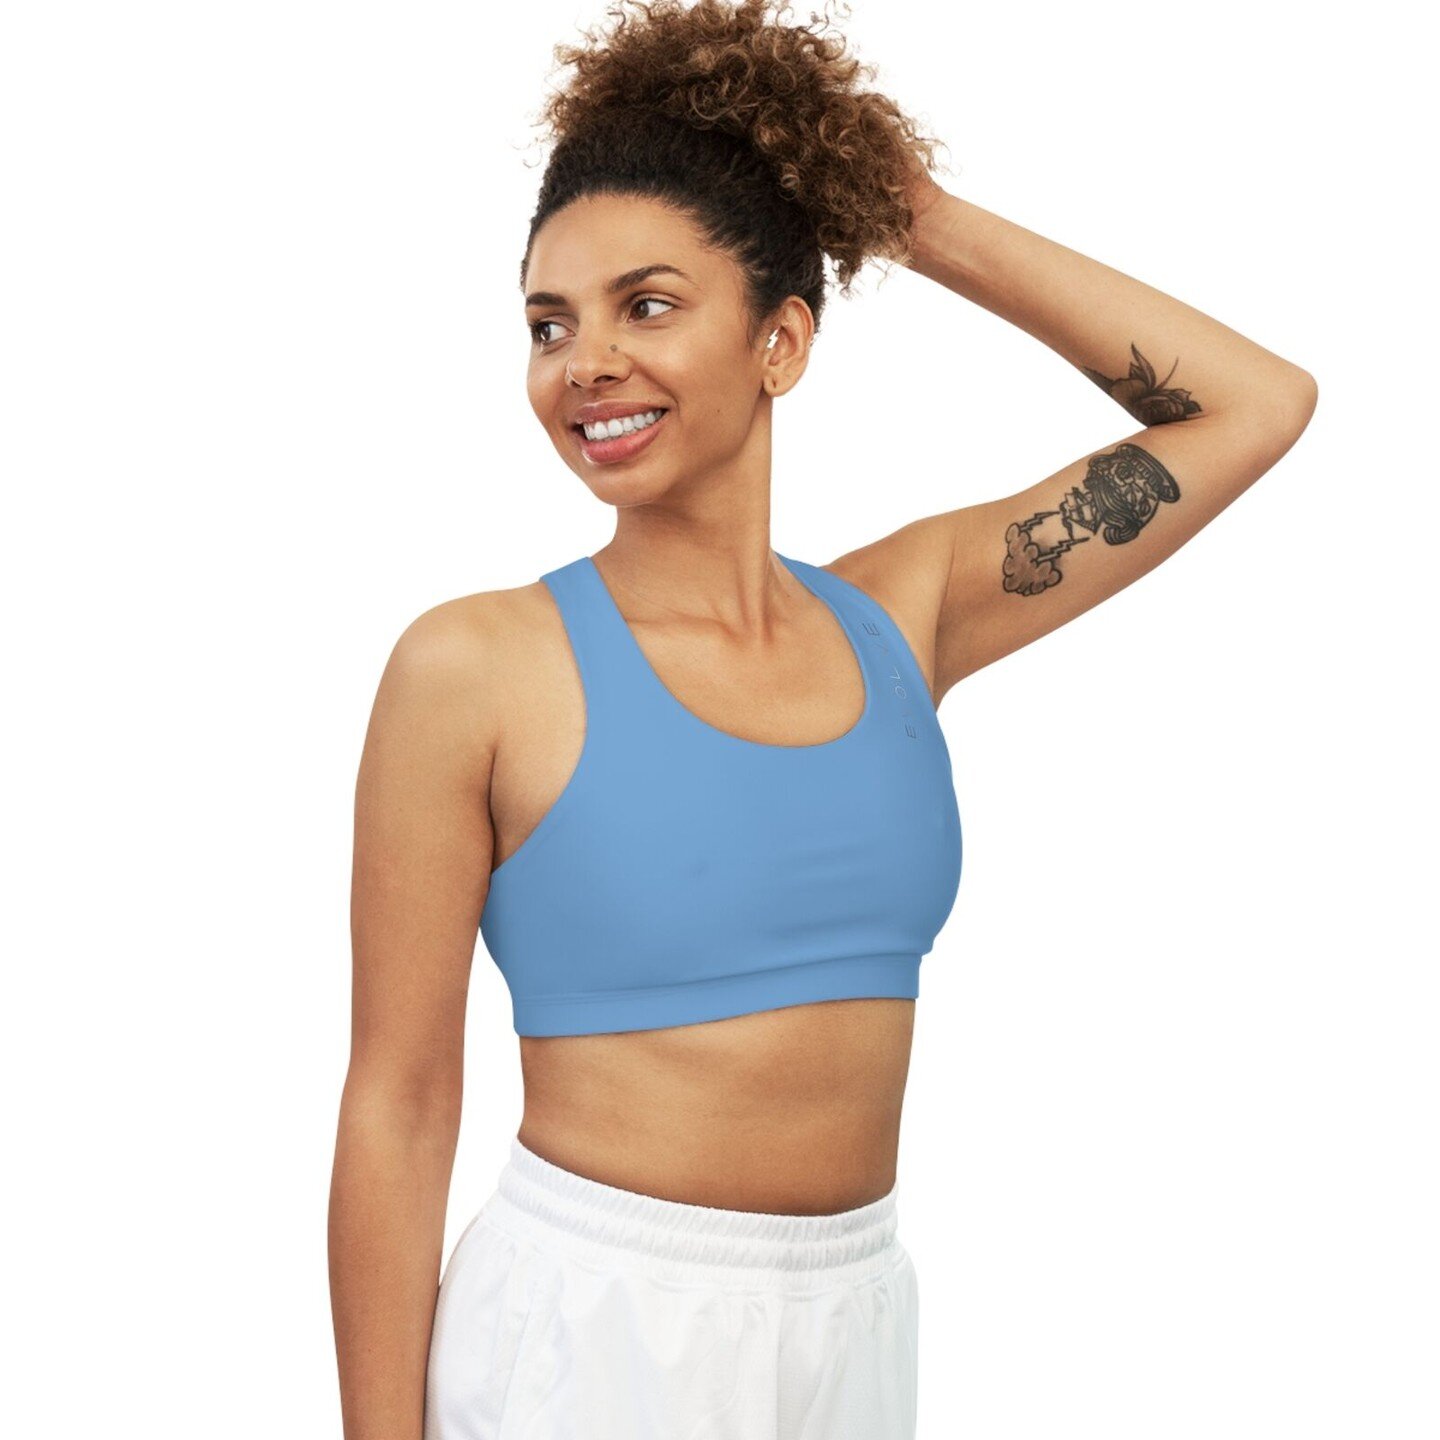 This sports bra is made to keep you stylishly comfy and well supported during peak performance. Made with 82% Microfiber Polyester and 18% Spandex, these bras strike the perfect balance between softness and stretchiness.

.: Soft to the touch
.: Runs